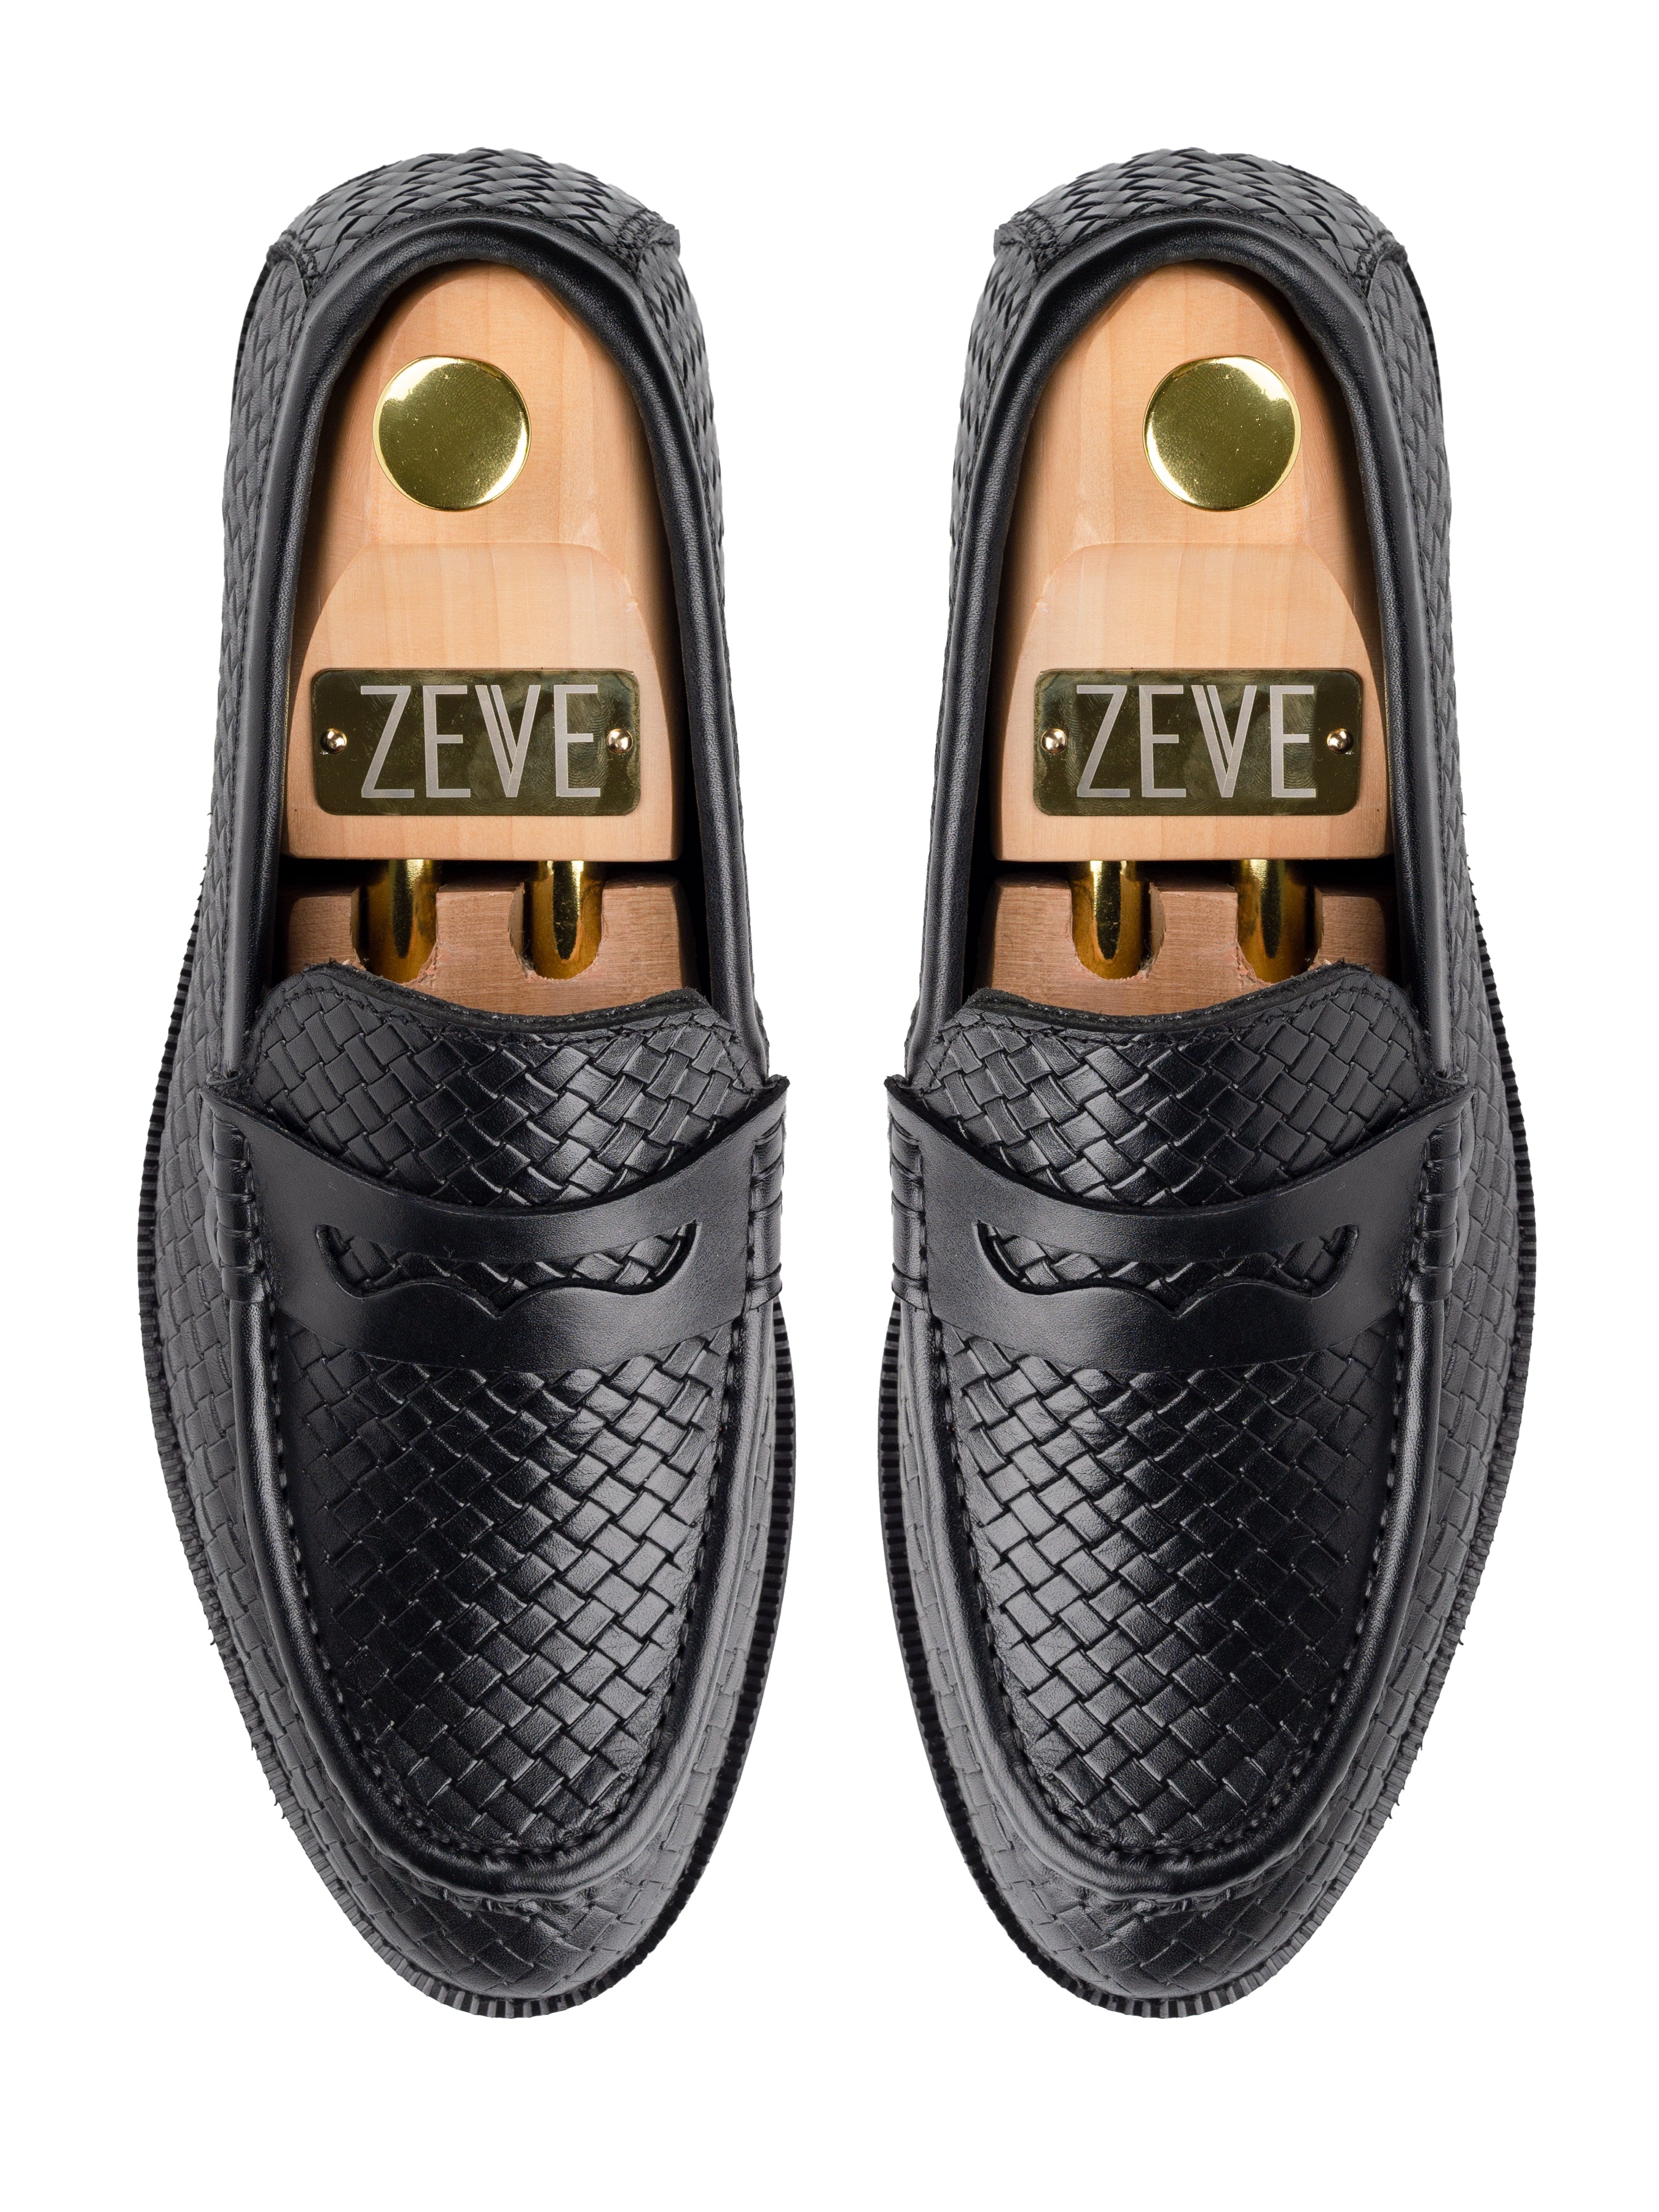 Penny Moccasin Loafer - Black Woven Leather (Crepe Sole)